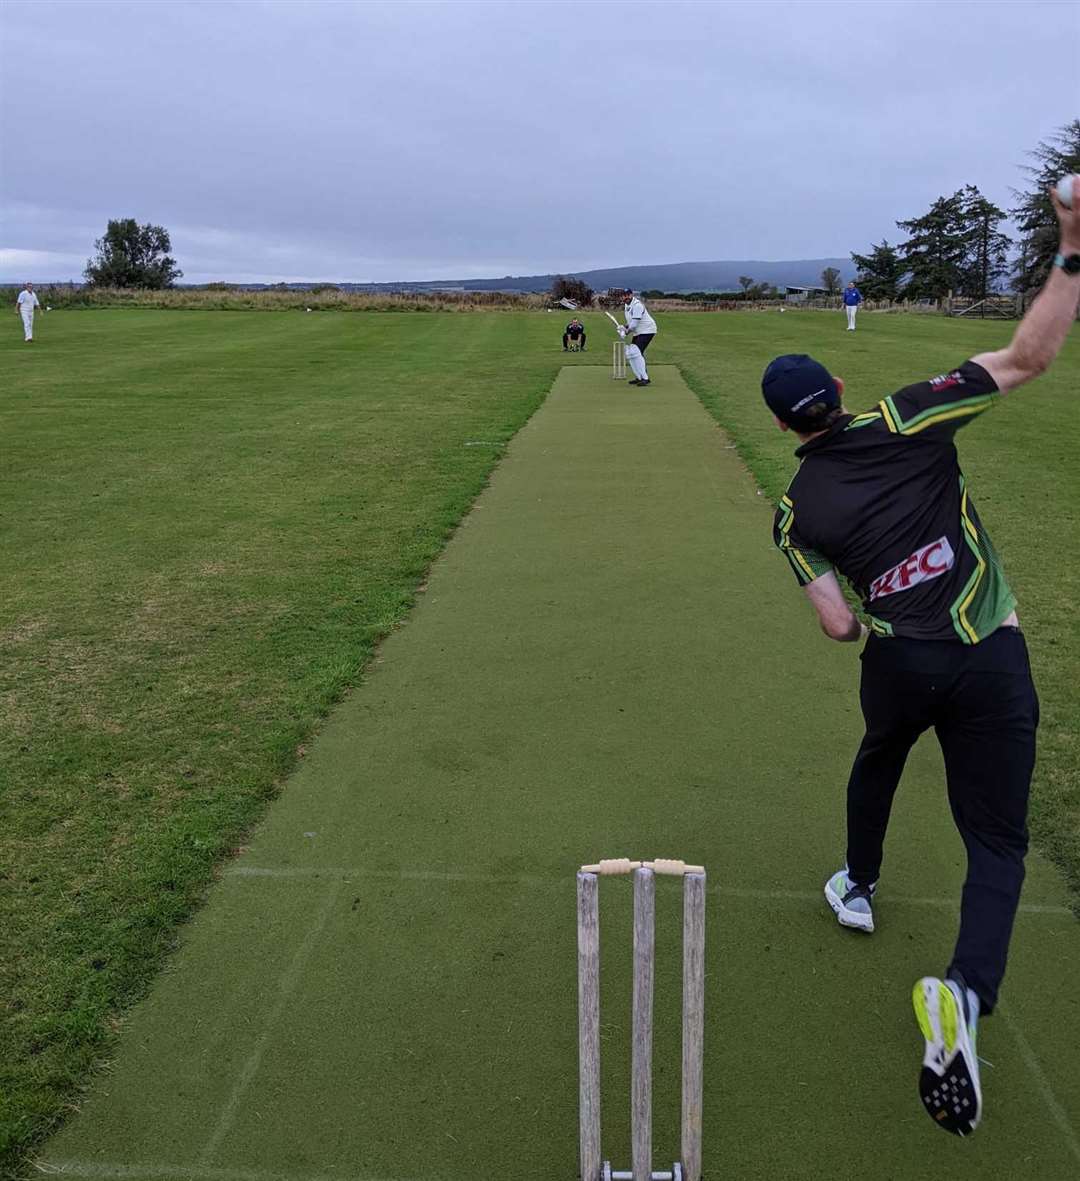 Dornoch cricketers have been busy practicing at their Meadows Park training ground since the start of March.